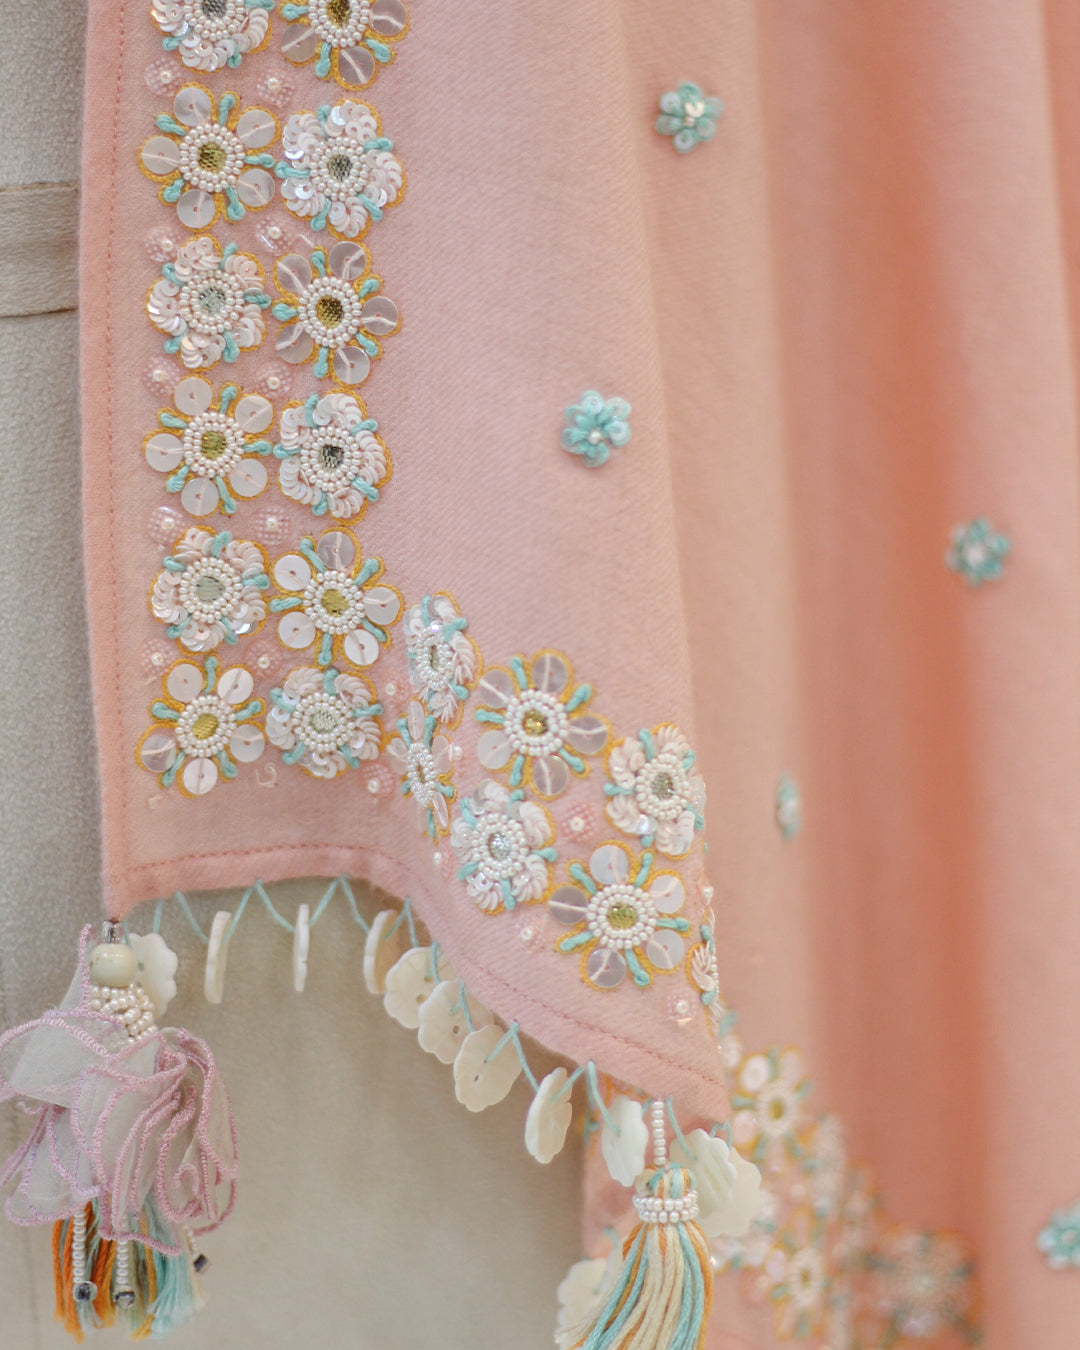 Shimmering Pashmina Shawl with Floral Embellishment and Shell Accents